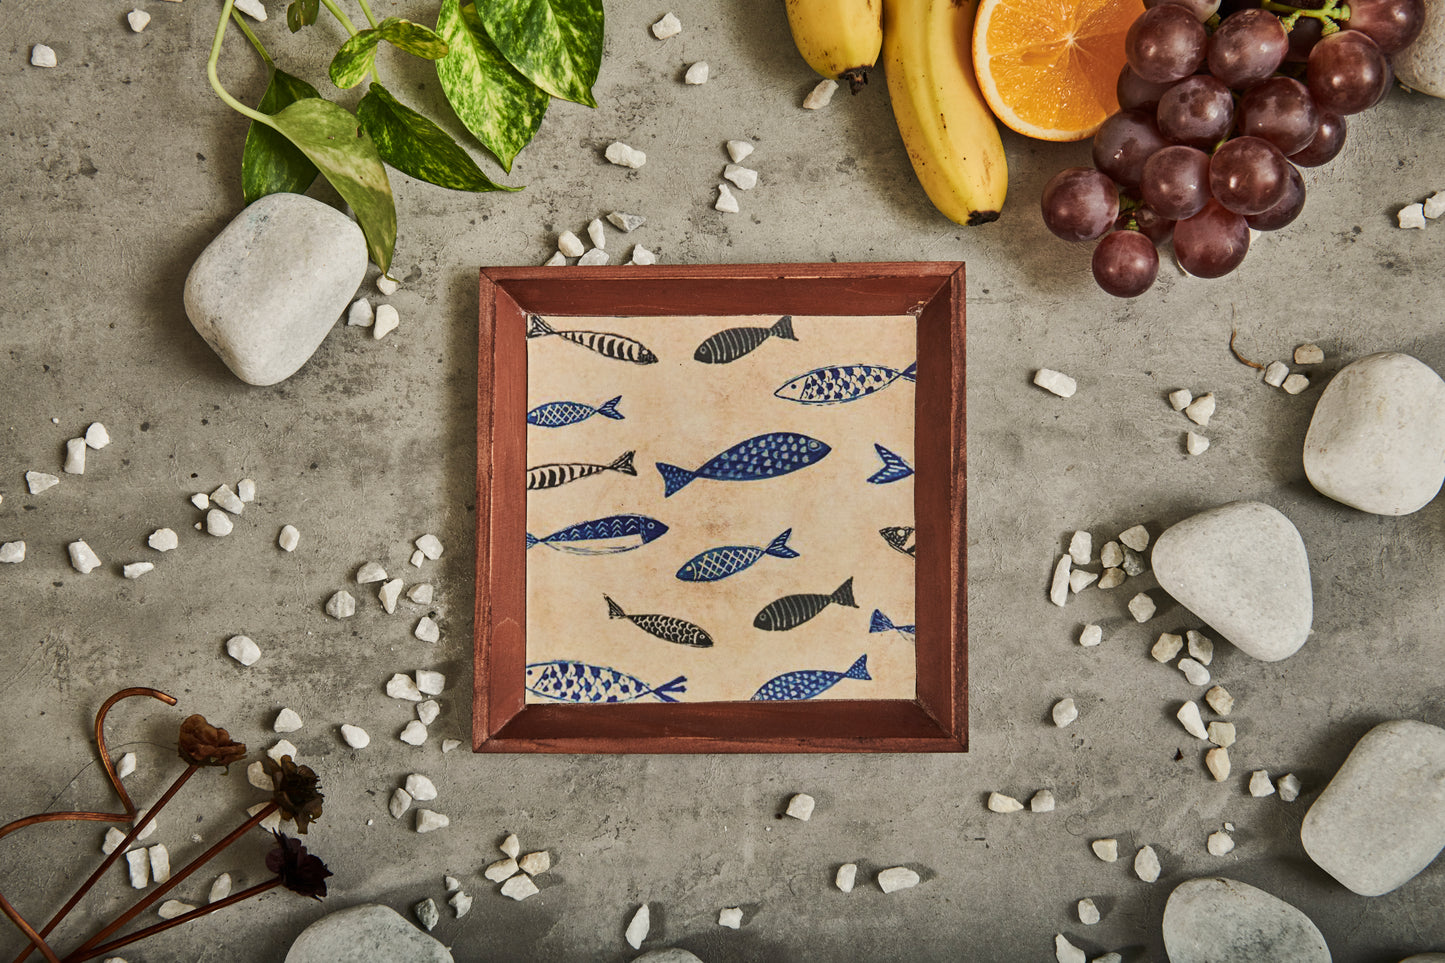 A Tiny Mistake Fish Small Square Wooden Serving Tray, 18 x 18 x 2 cm